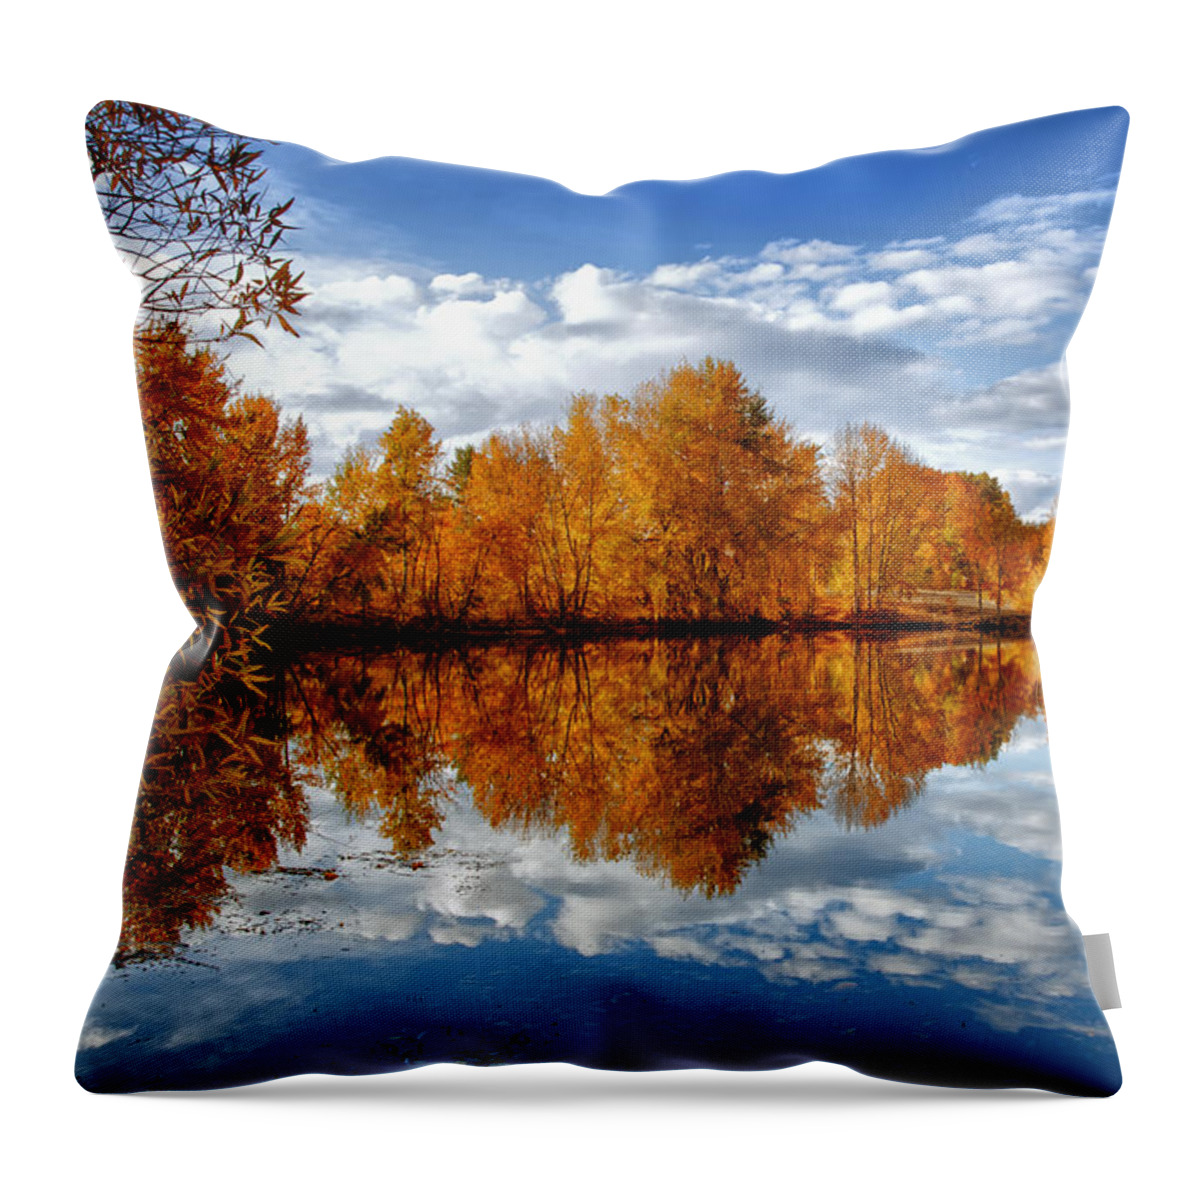 Autumn Throw Pillow featuring the photograph Autumn Reflection by Mary Jo Allen